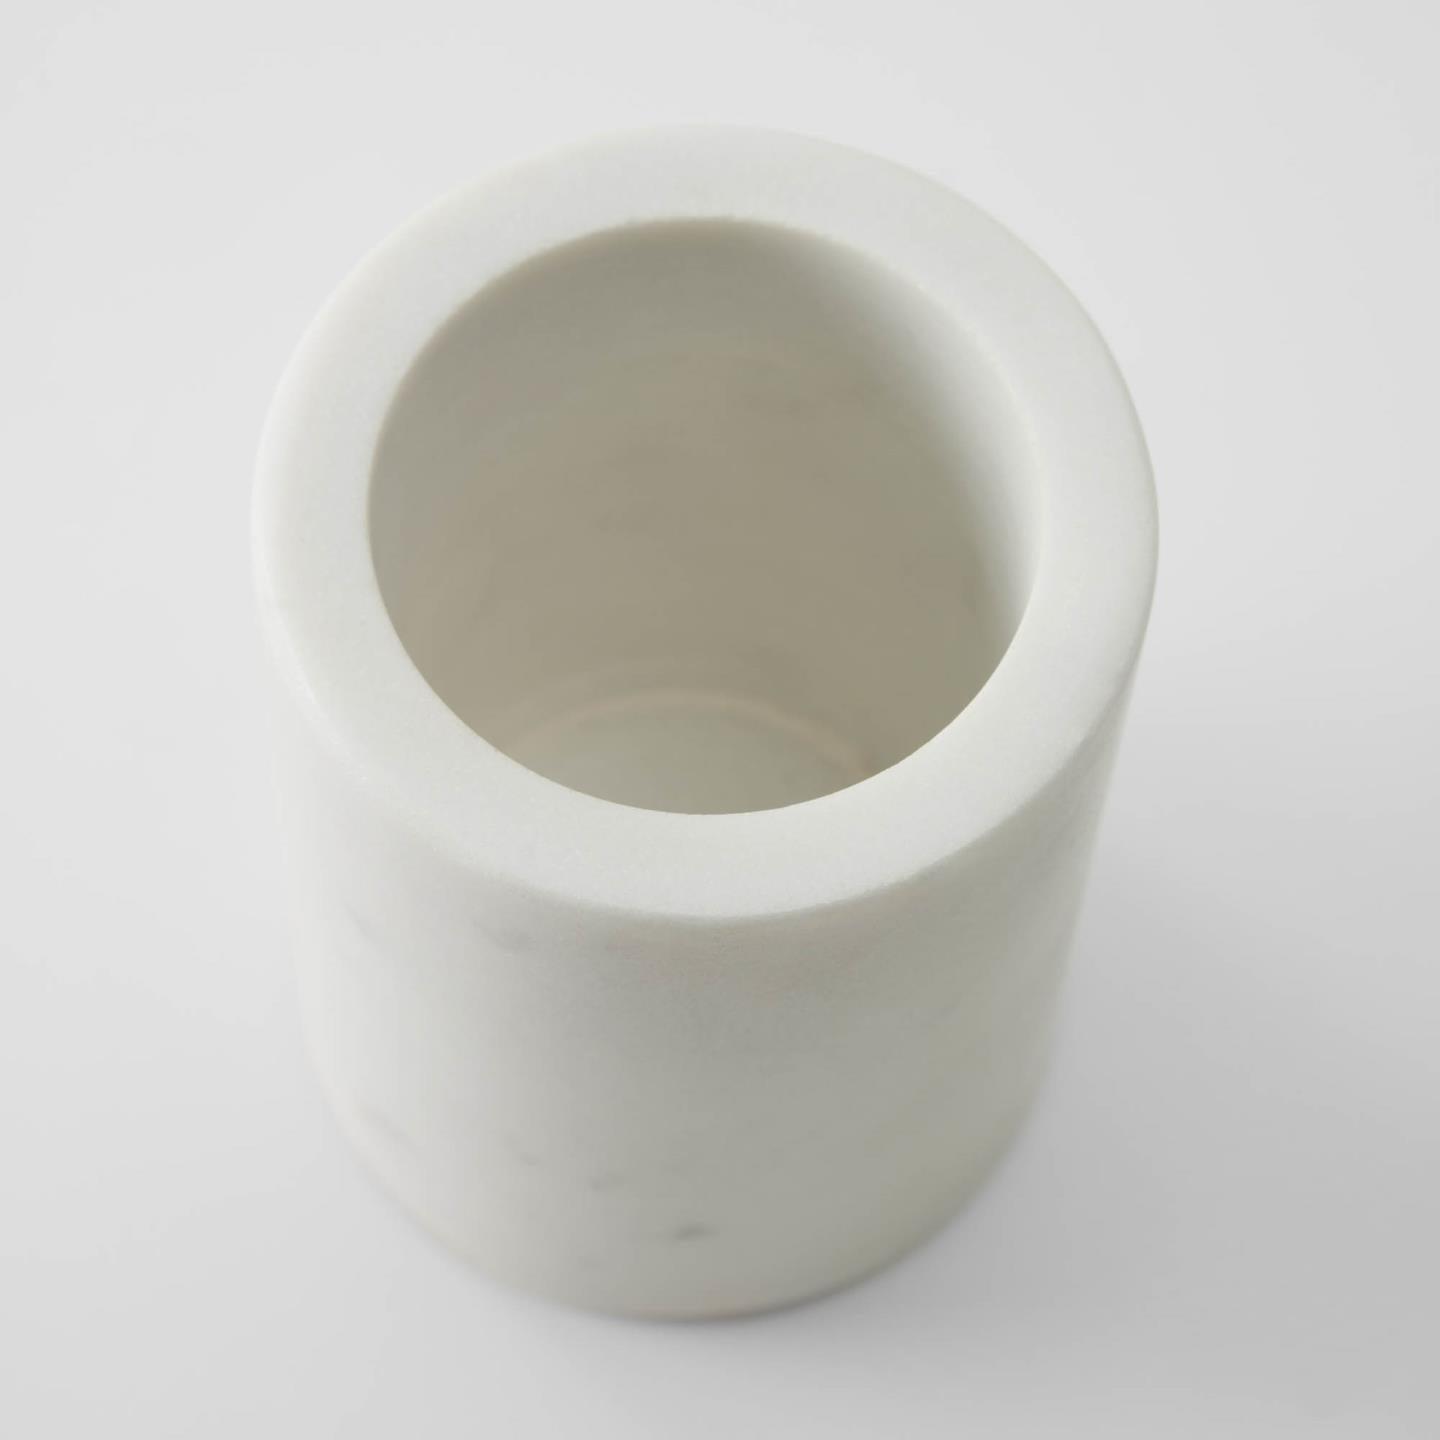 White Marble Bathroom Cup